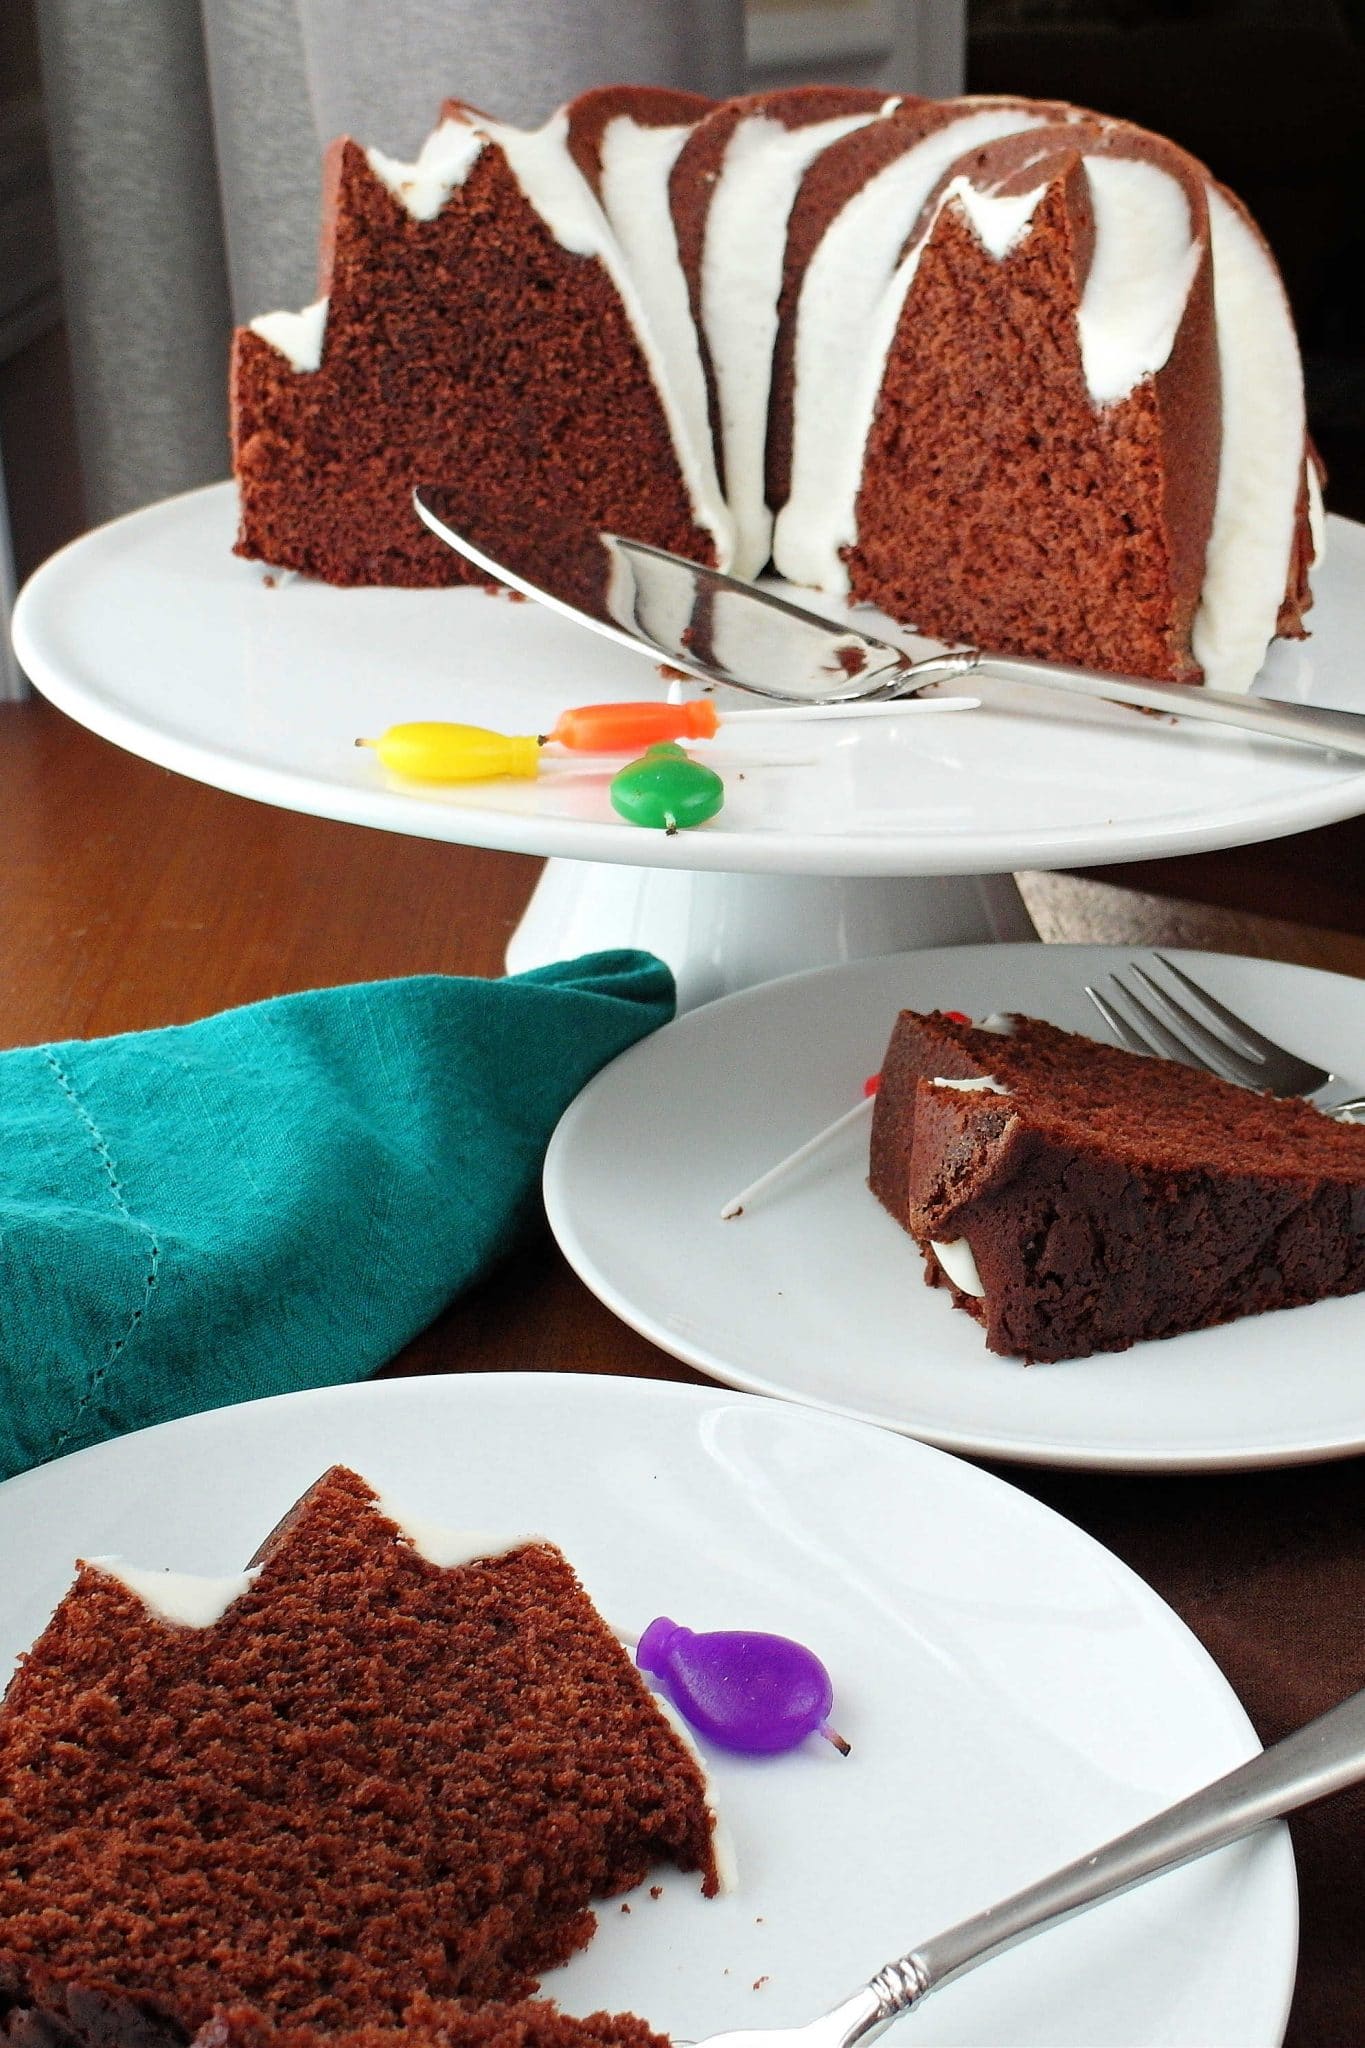 A mocha caramel pound cake on a white cake stand with two plates with slices of the cake on them.